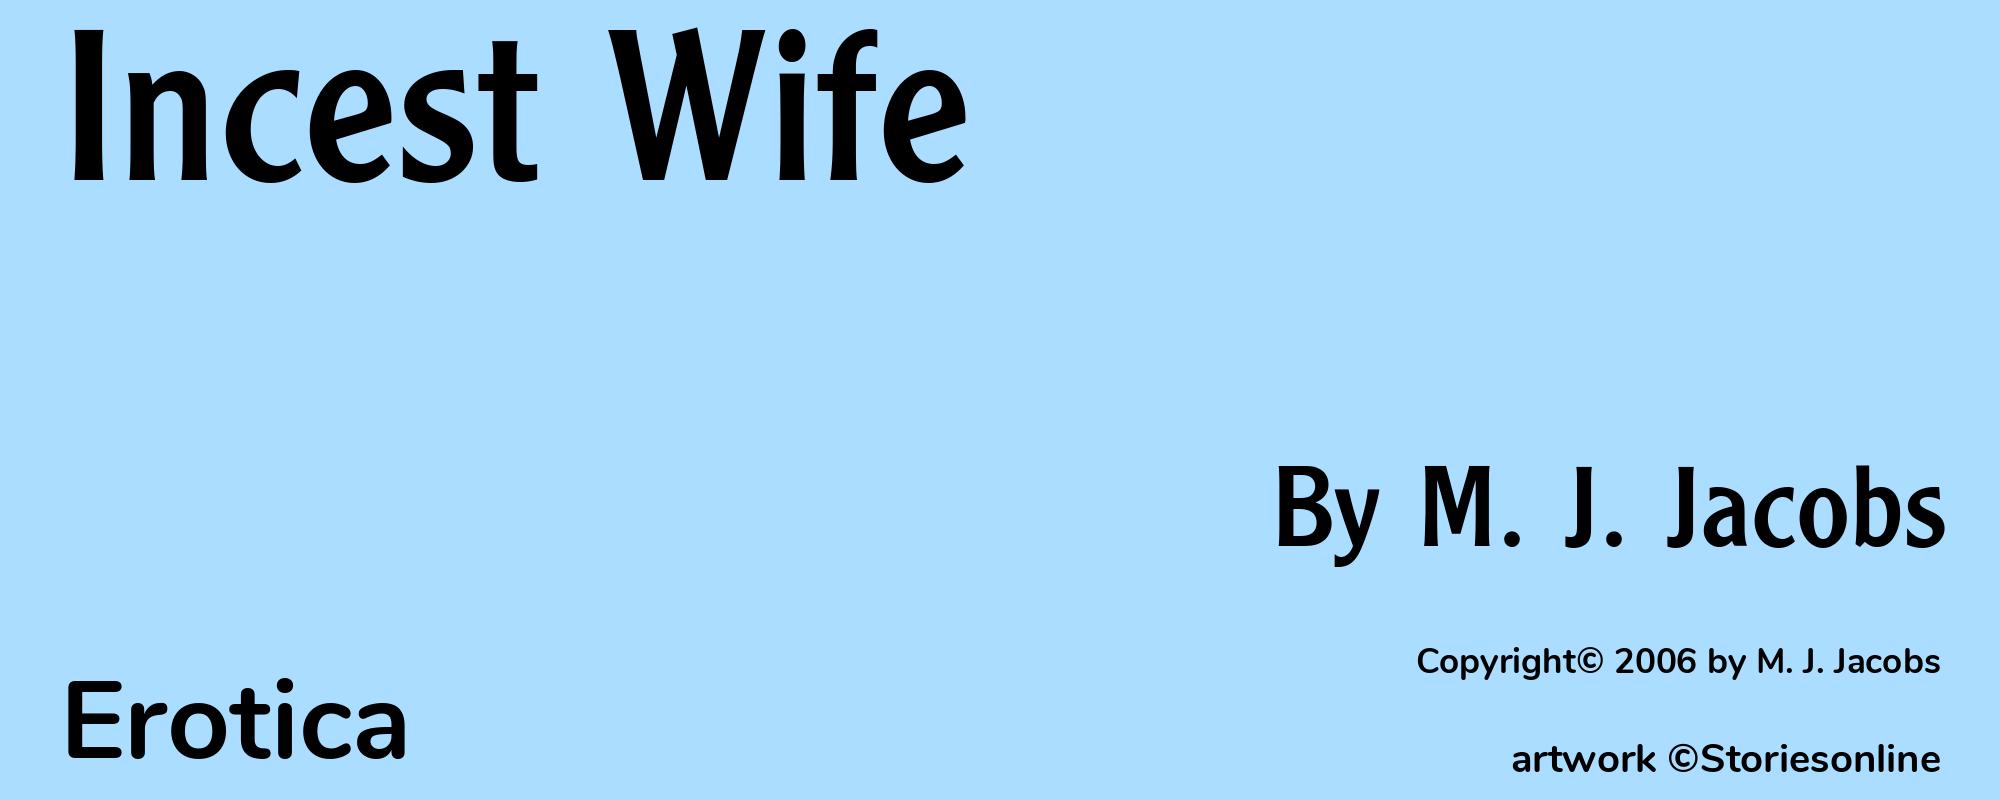 Incest Wife - Cover